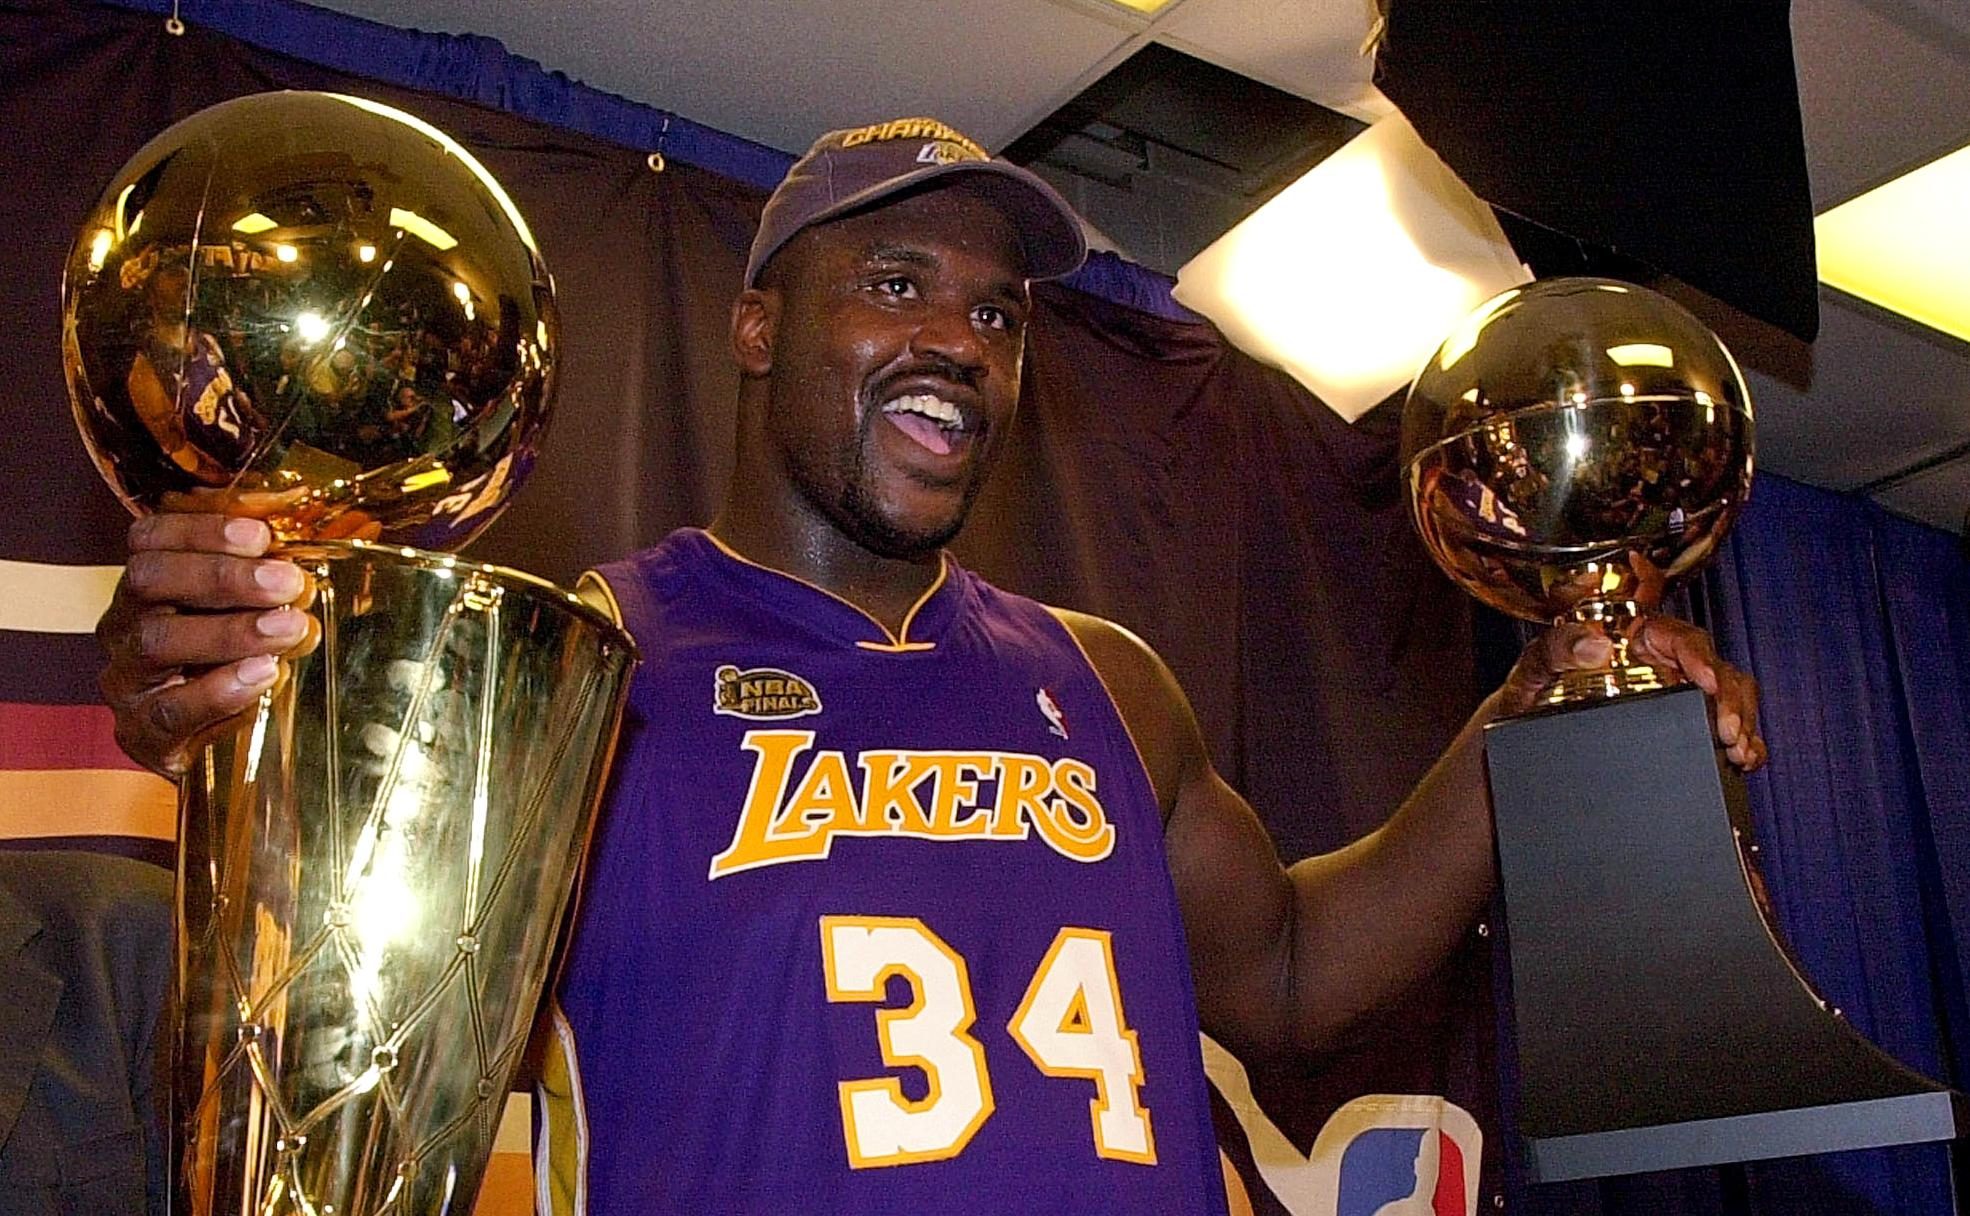 NBA - 8 juin 2001 : Shaquille O'Neal saccage les 76ers d'Iverson1970 x 1216